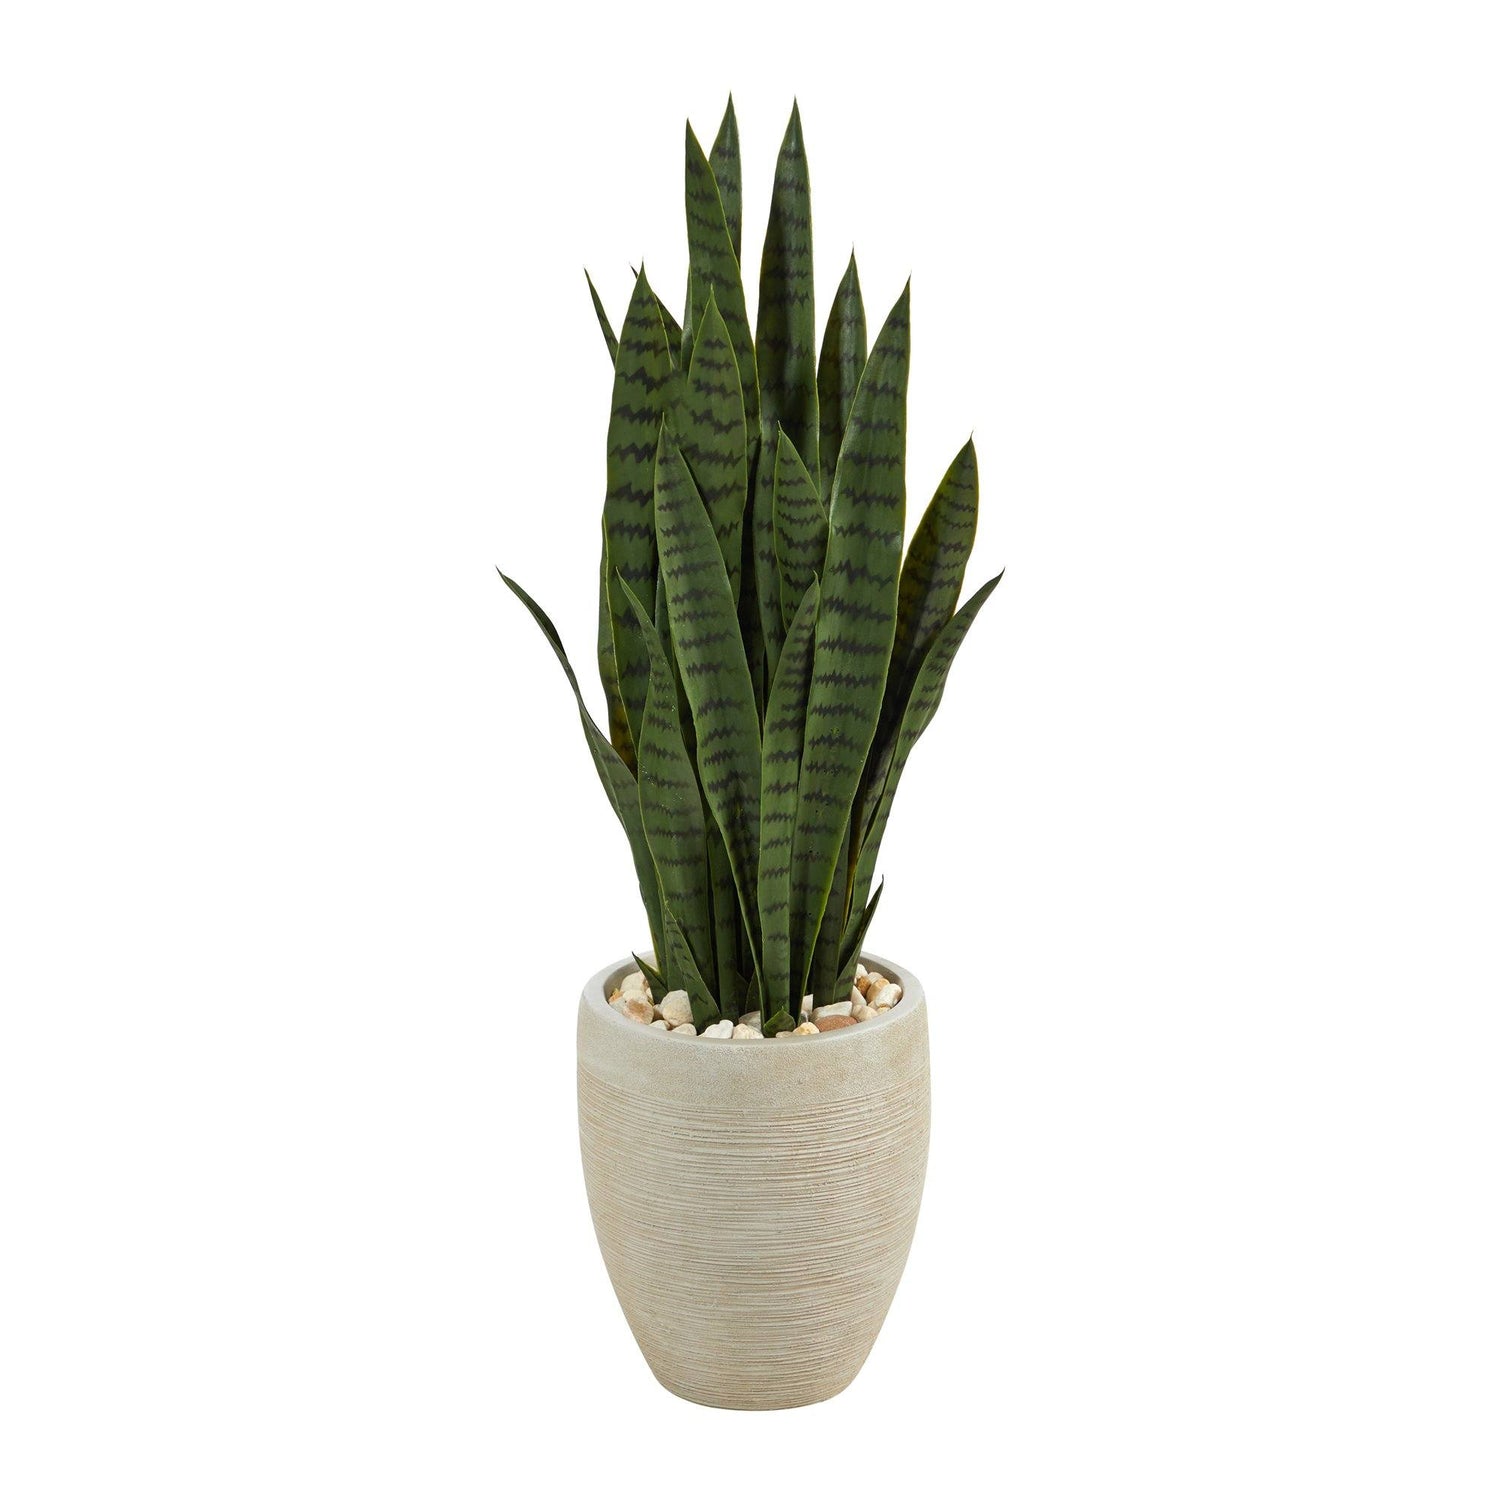 40” Sansevieria Artificial Plant in Sand Colored Planter